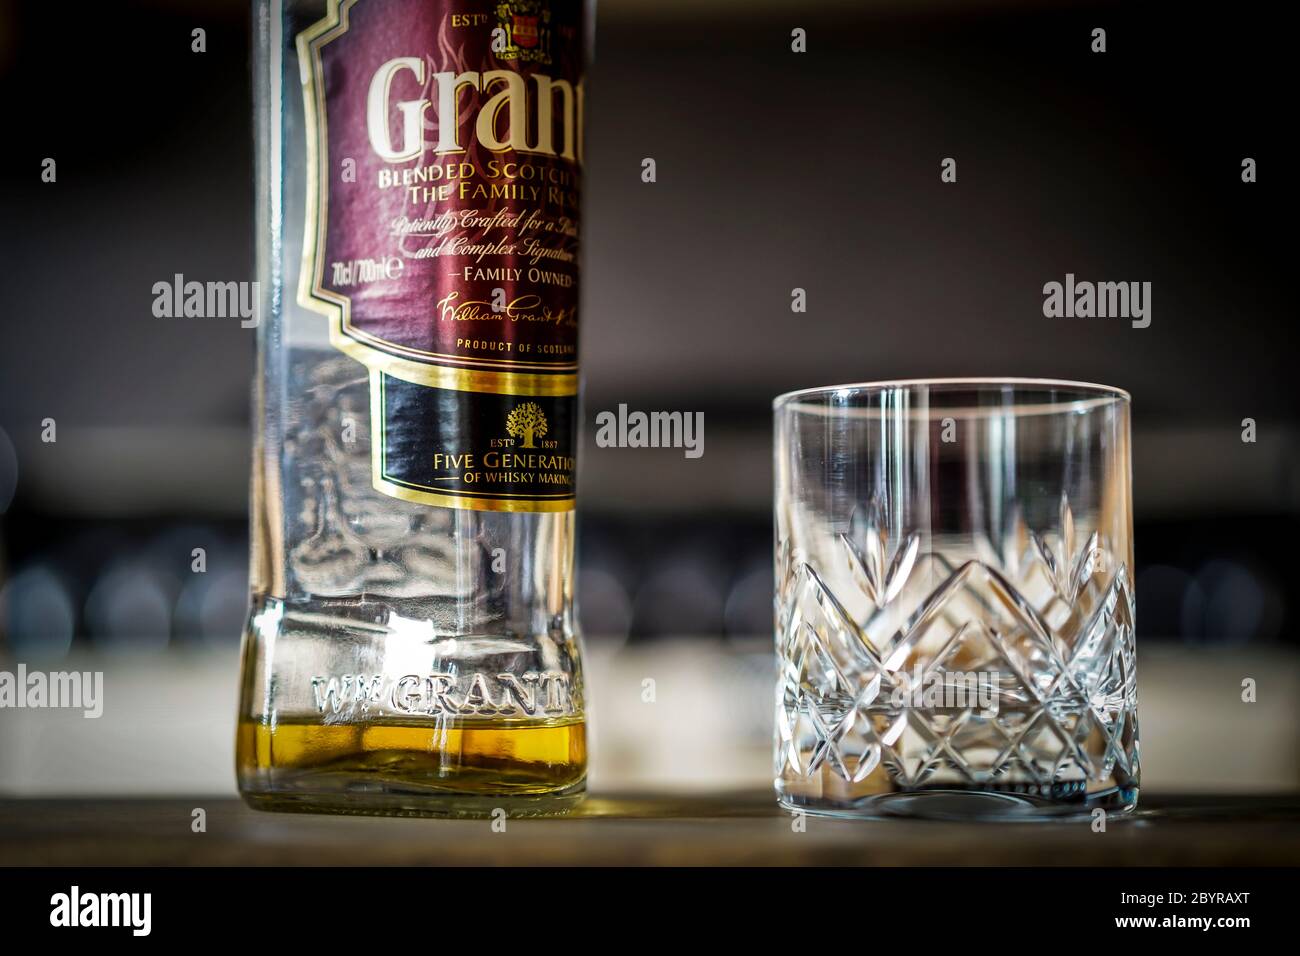 Grant's scotch whisky bottle and empty crystal whisky tumbler glass on kitchen table. Drinking alcohol at home in UK lockdown. Stock Photo